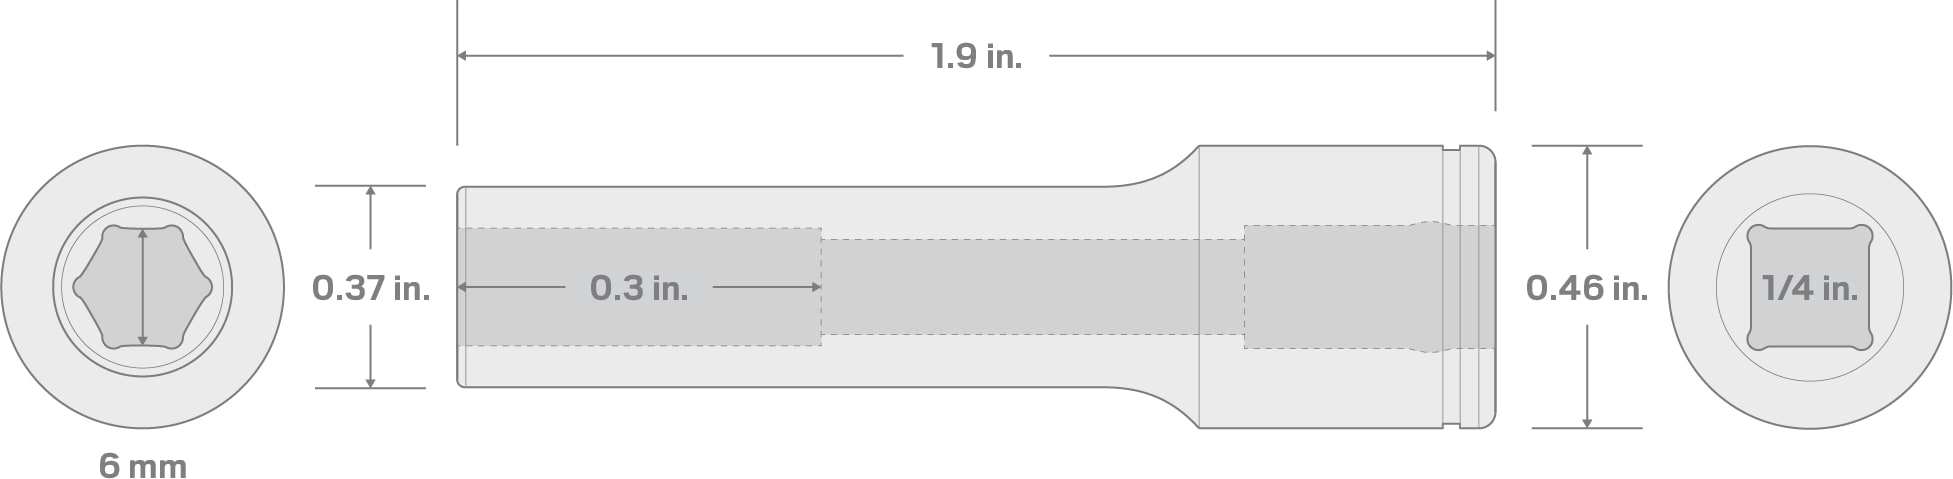 Specs for 1/4 Inch Drive x 6 mm Deep 6-Point Socket